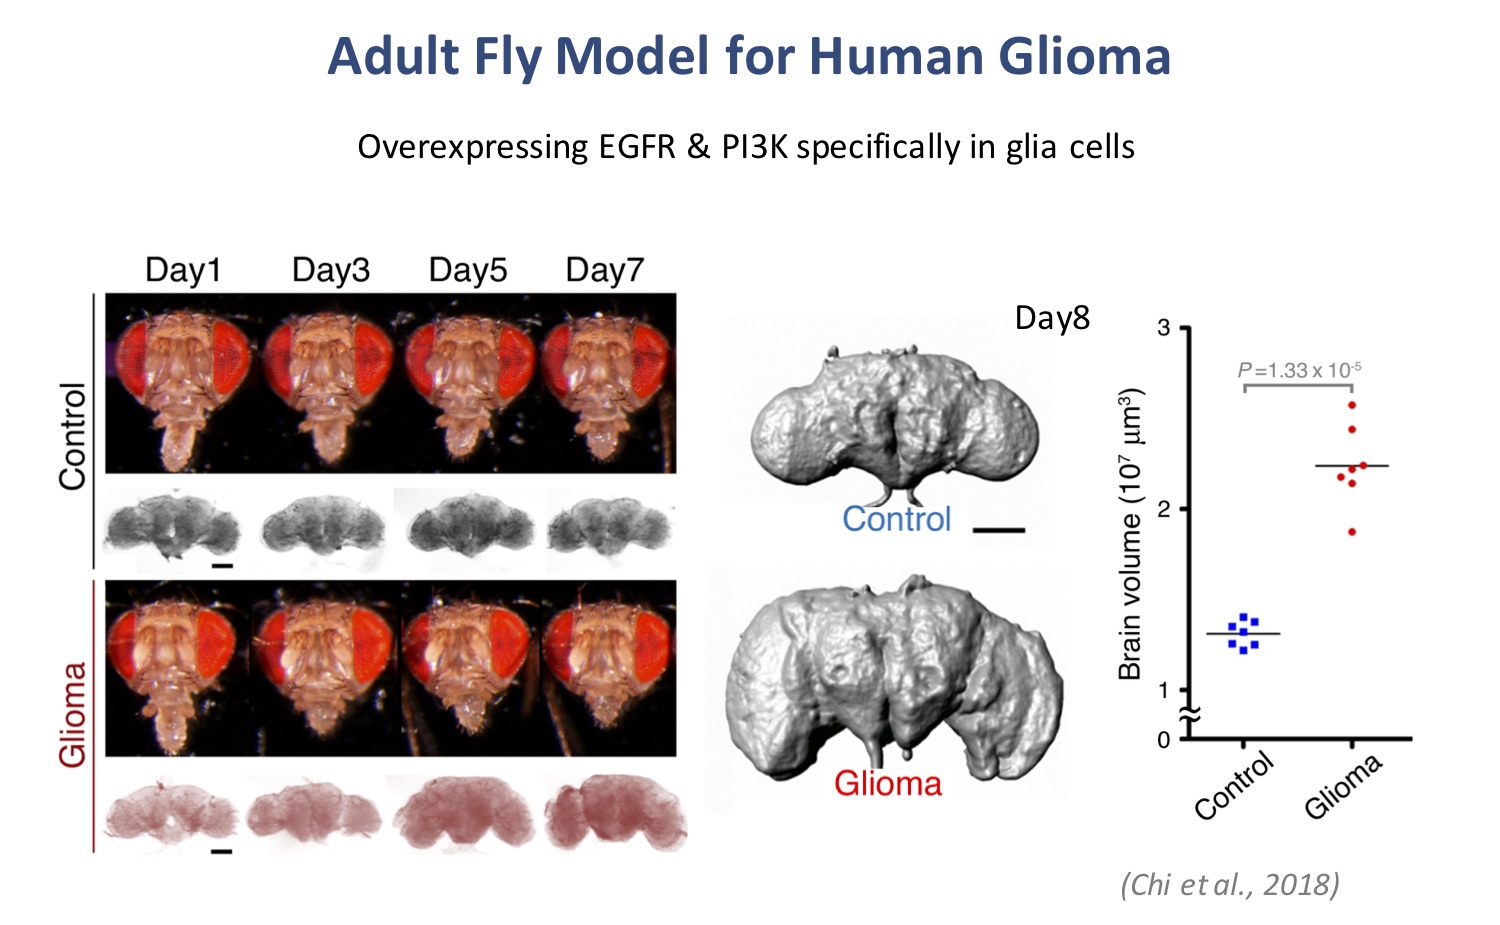 Adult Fly Model for Human Glioma